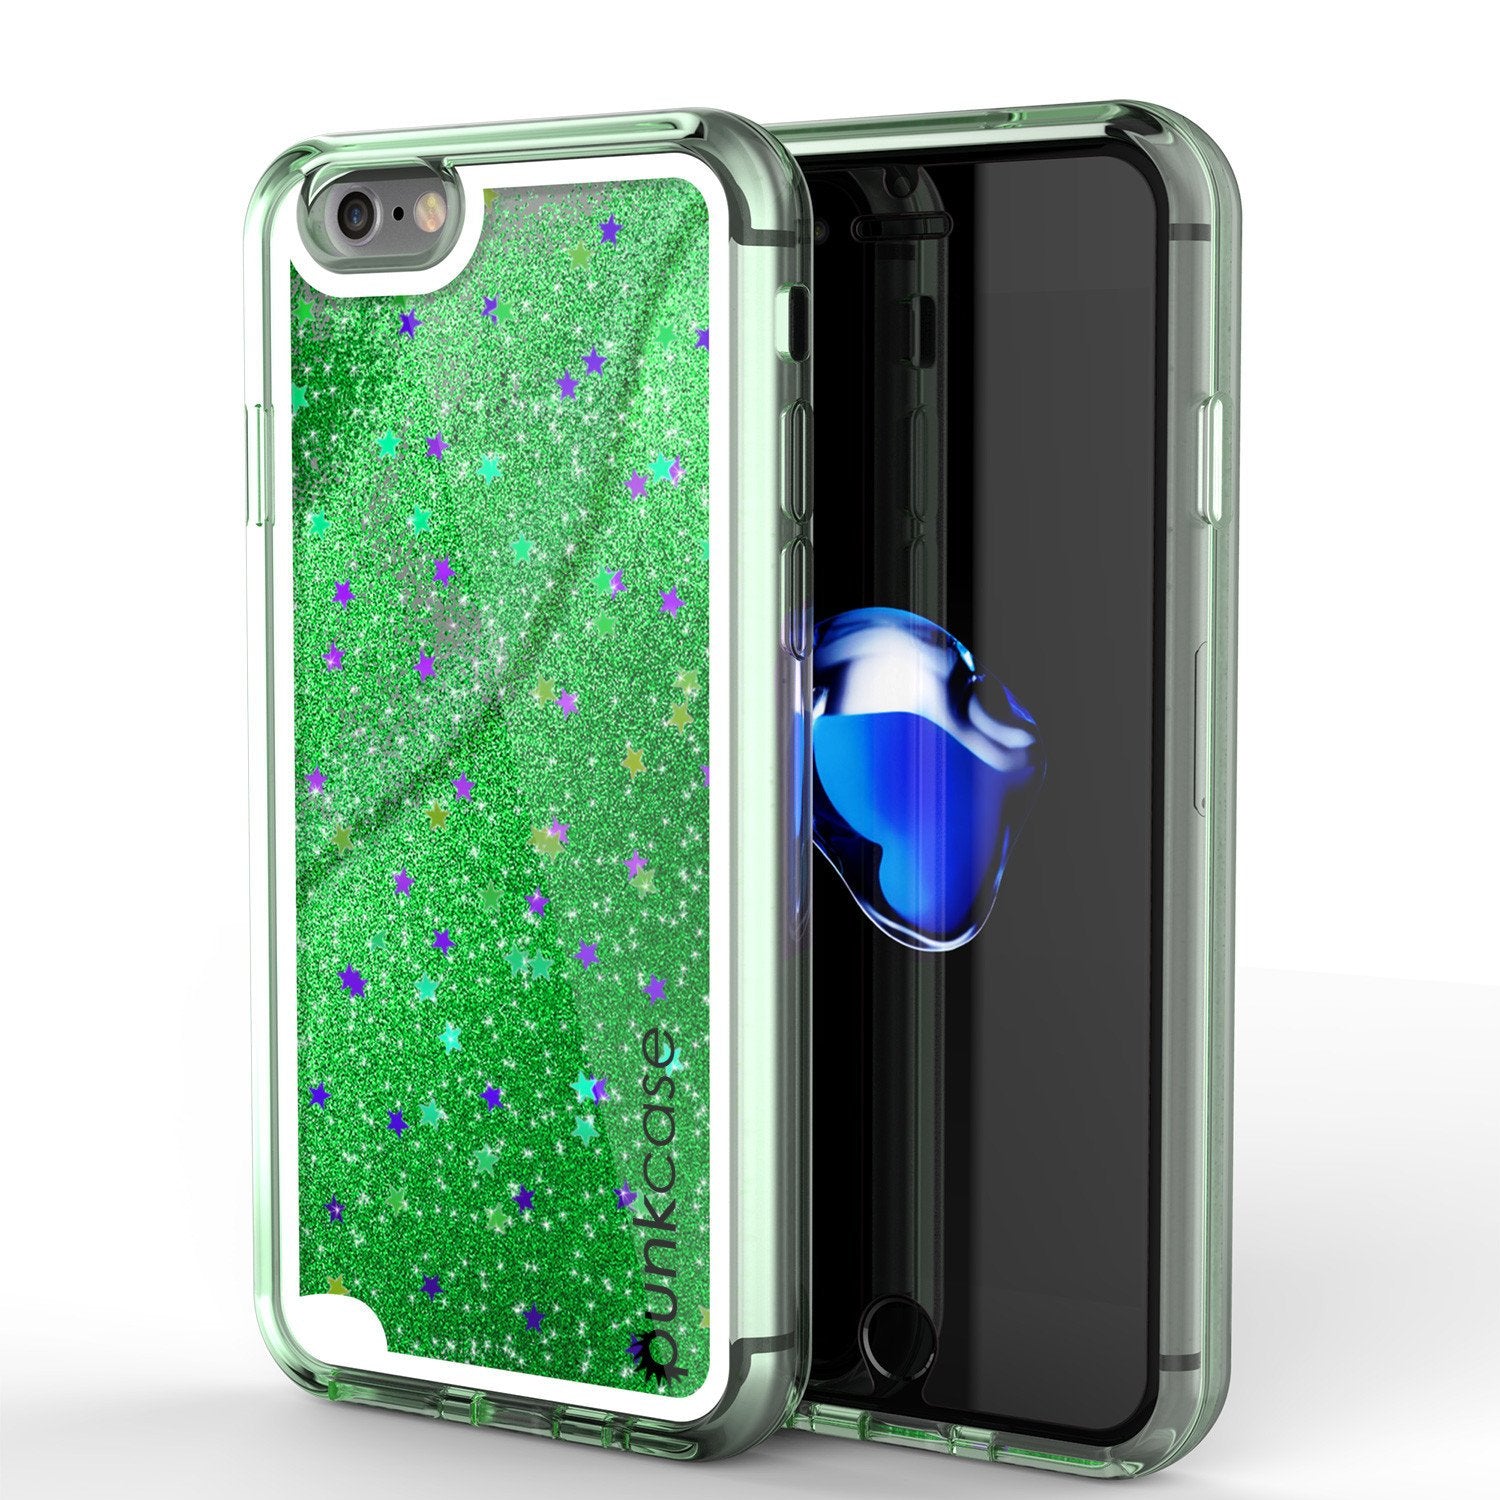 iPhone 7 Case, Punkcase [Liquid Green Series] Protective Dual Layer Floating Glitter Cover with lots of Bling & Sparkle + 0.3mm Tempered Glass Screen Protector for Apple iPhone 7s